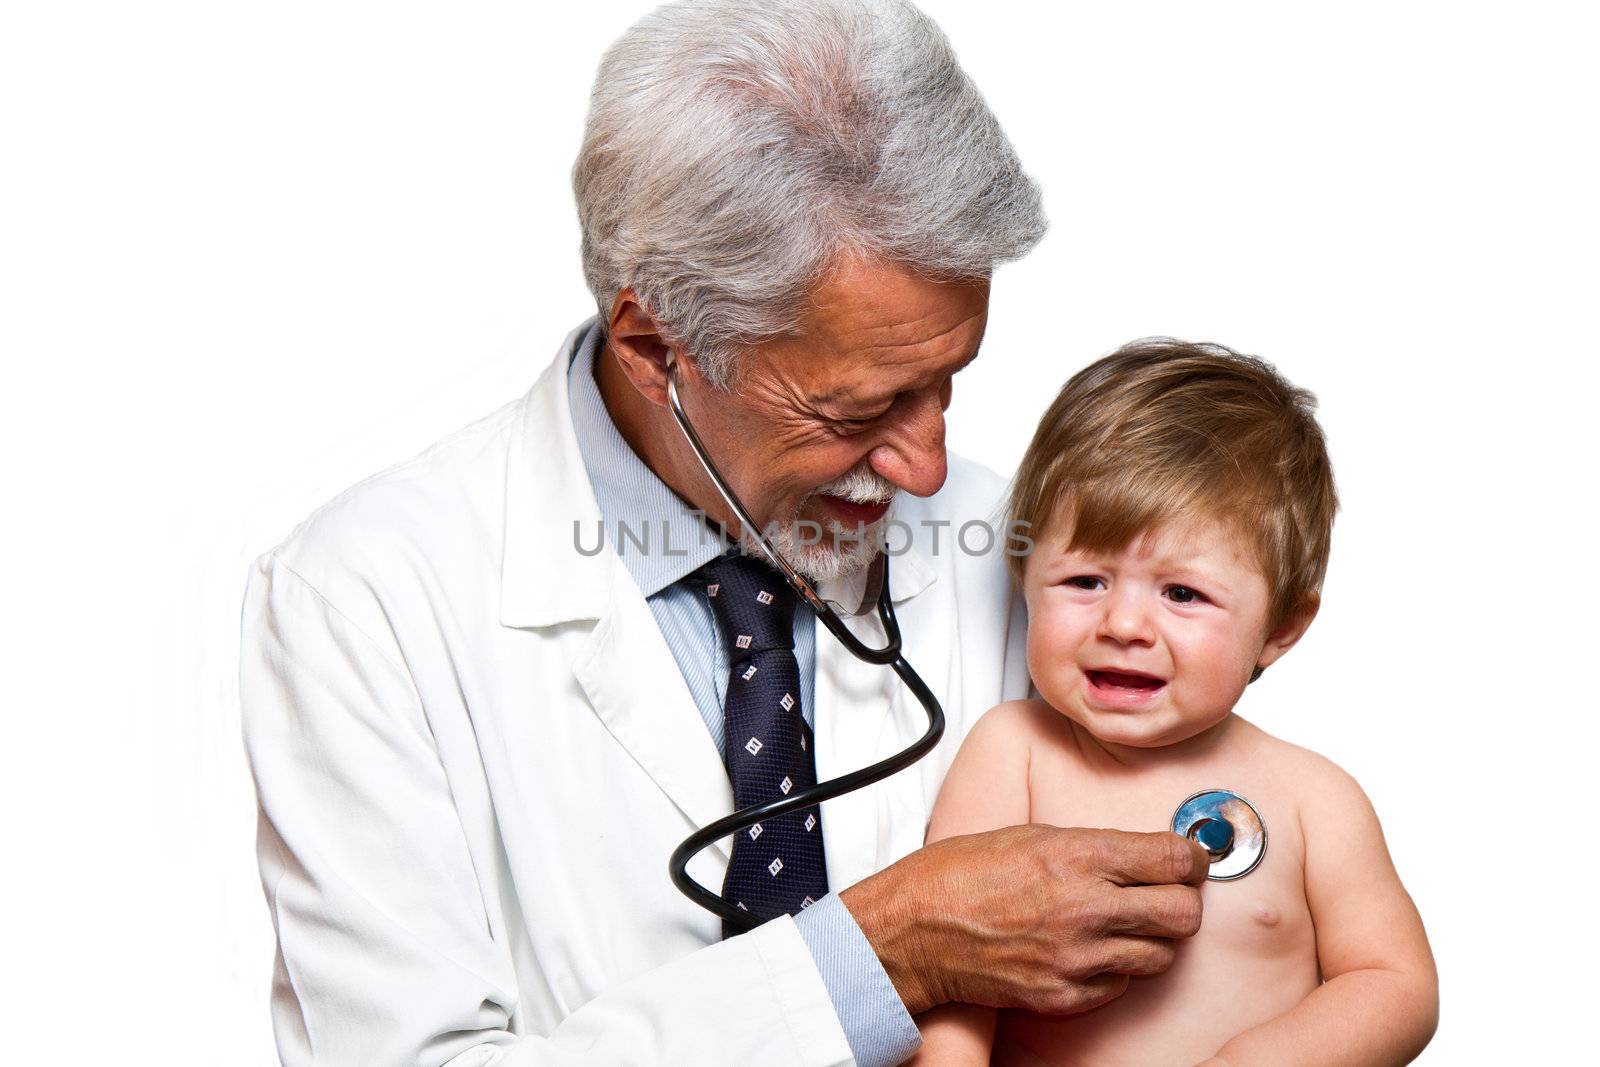 Male doctor examining a child patient in a hospital 